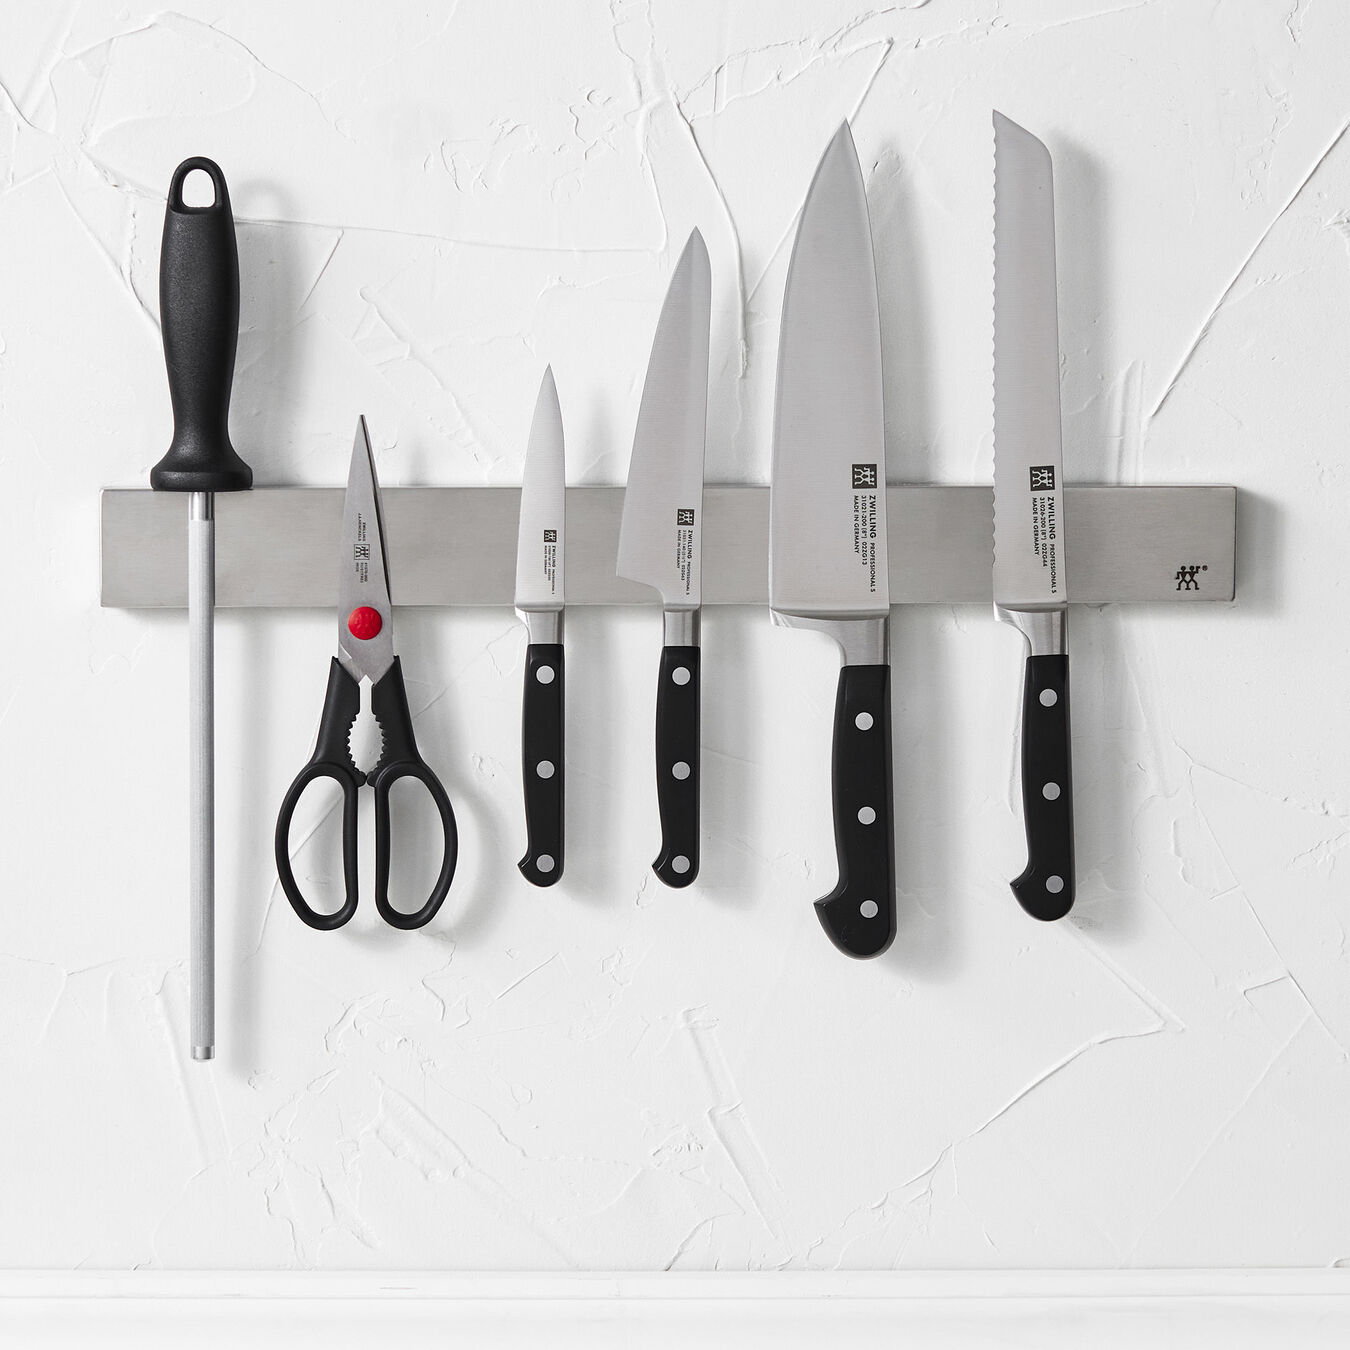 7-pc, Set with 17.5" Stainless Magnetic Knife Bar,,large 9